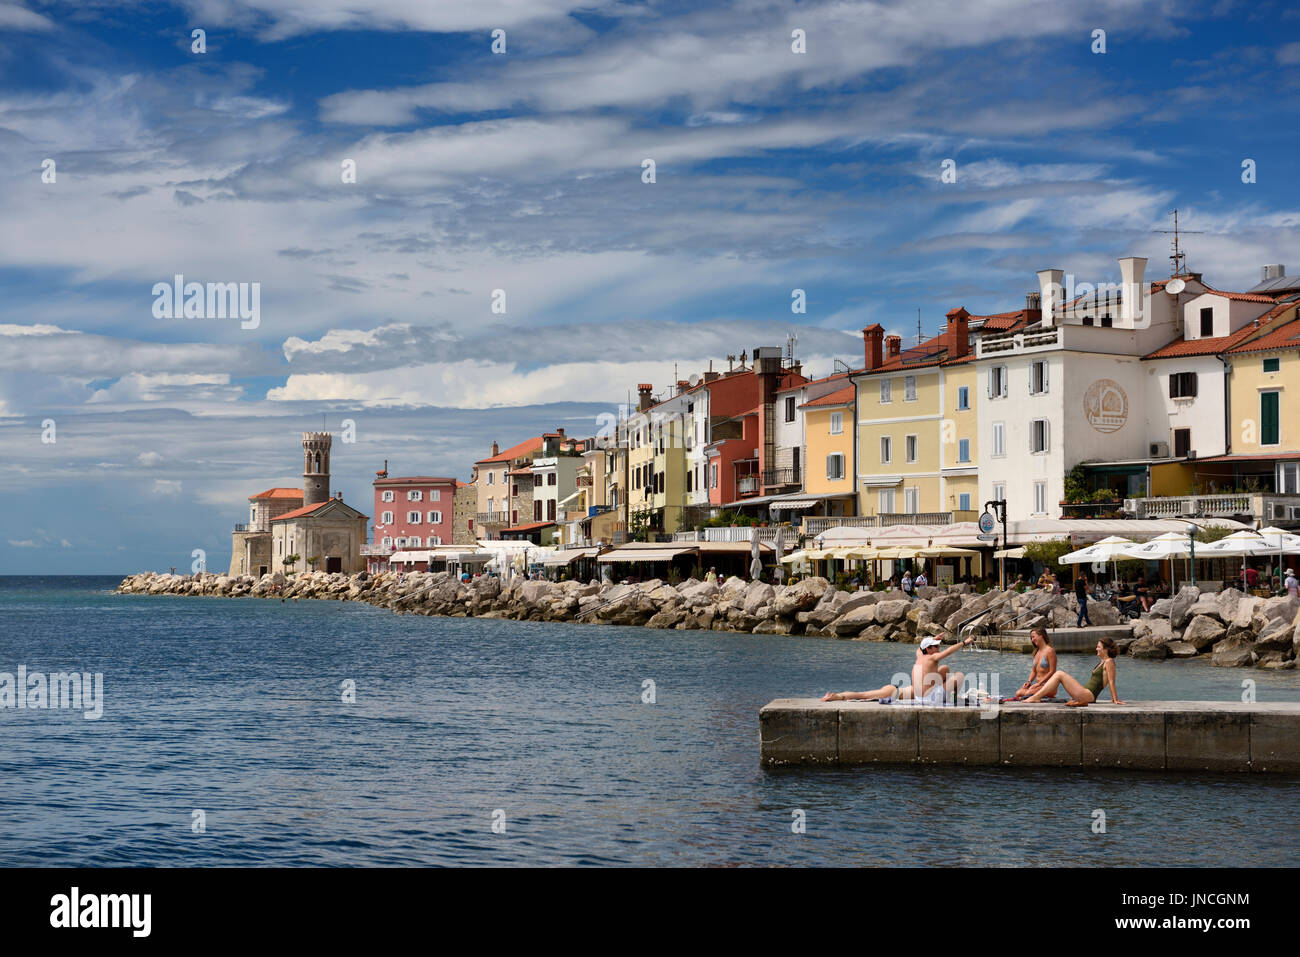 Young people sunbathing on dock at Piran Slovenia on the Adriatic Sea coast with 13th century Church of St Clement at Punta Lighthouse Stock Photo